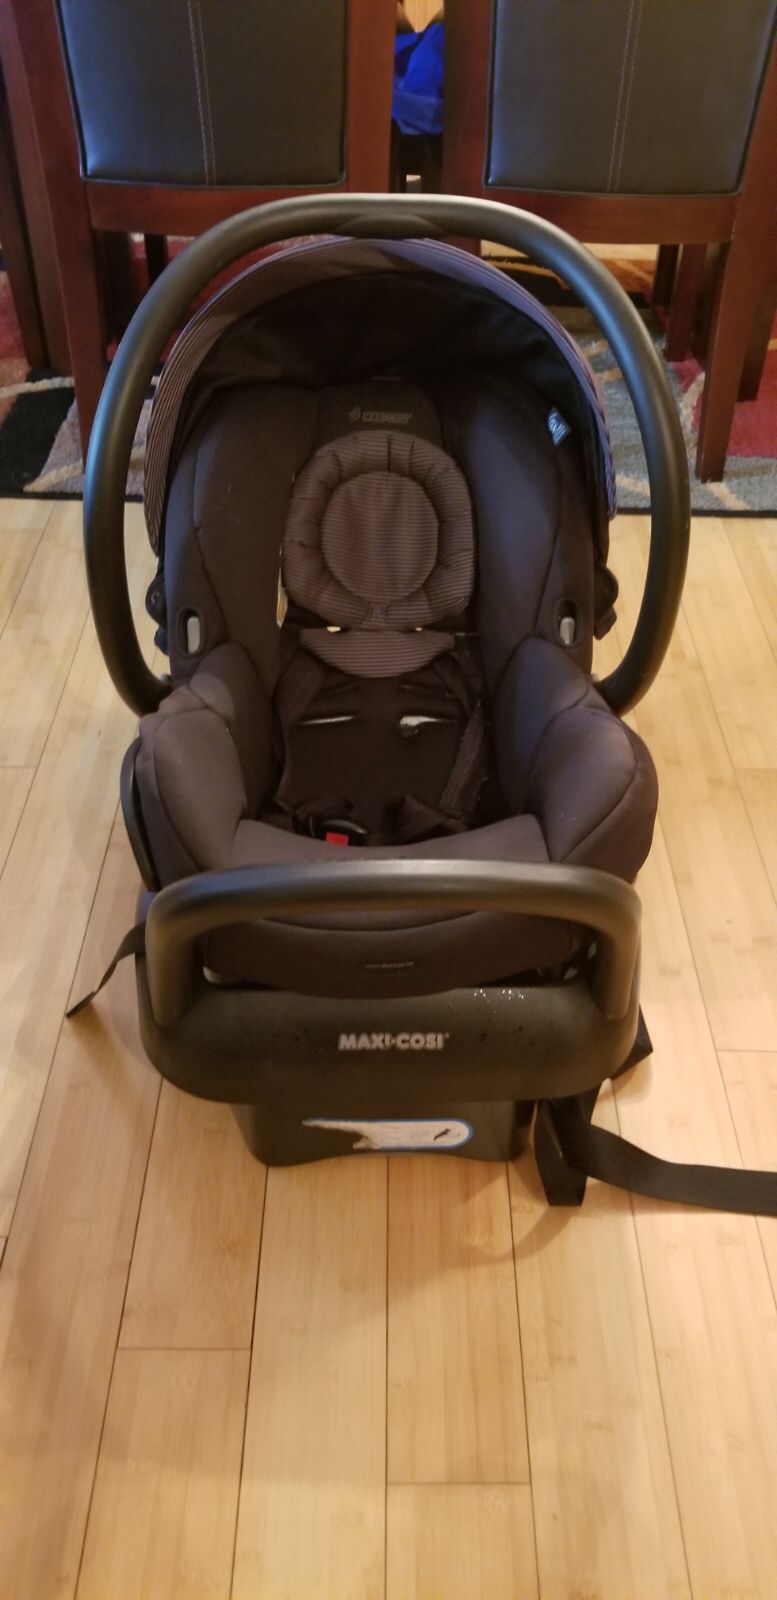 Maxi cosi infant car seat with the base